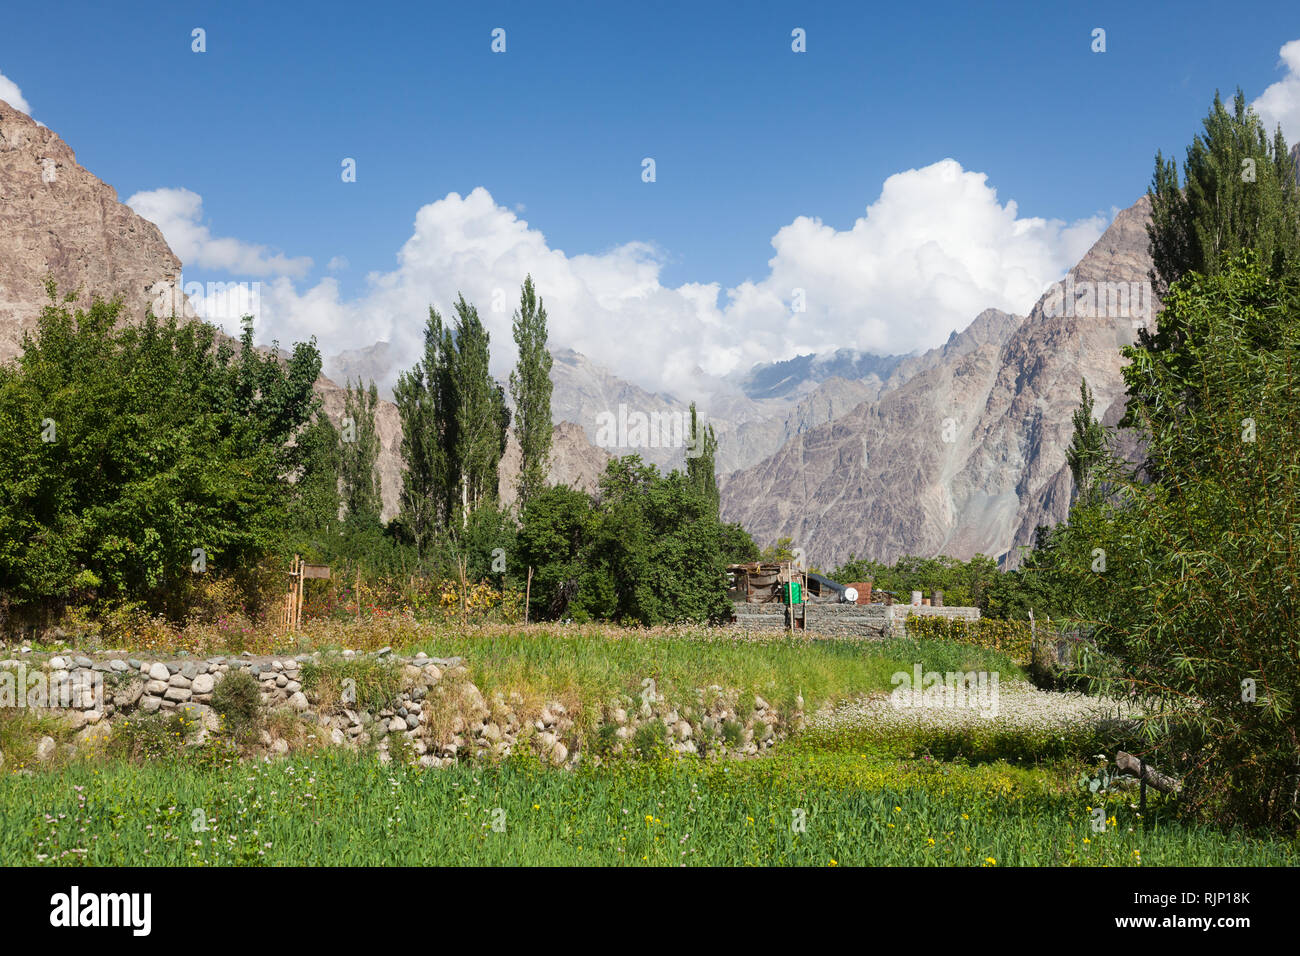 Beautiful scenery of Turtuk village located in Nubra Valley (in part along Shyok River) close to Line of Contol, Ladakh, Jammu and Kashmir, India Stock Photo